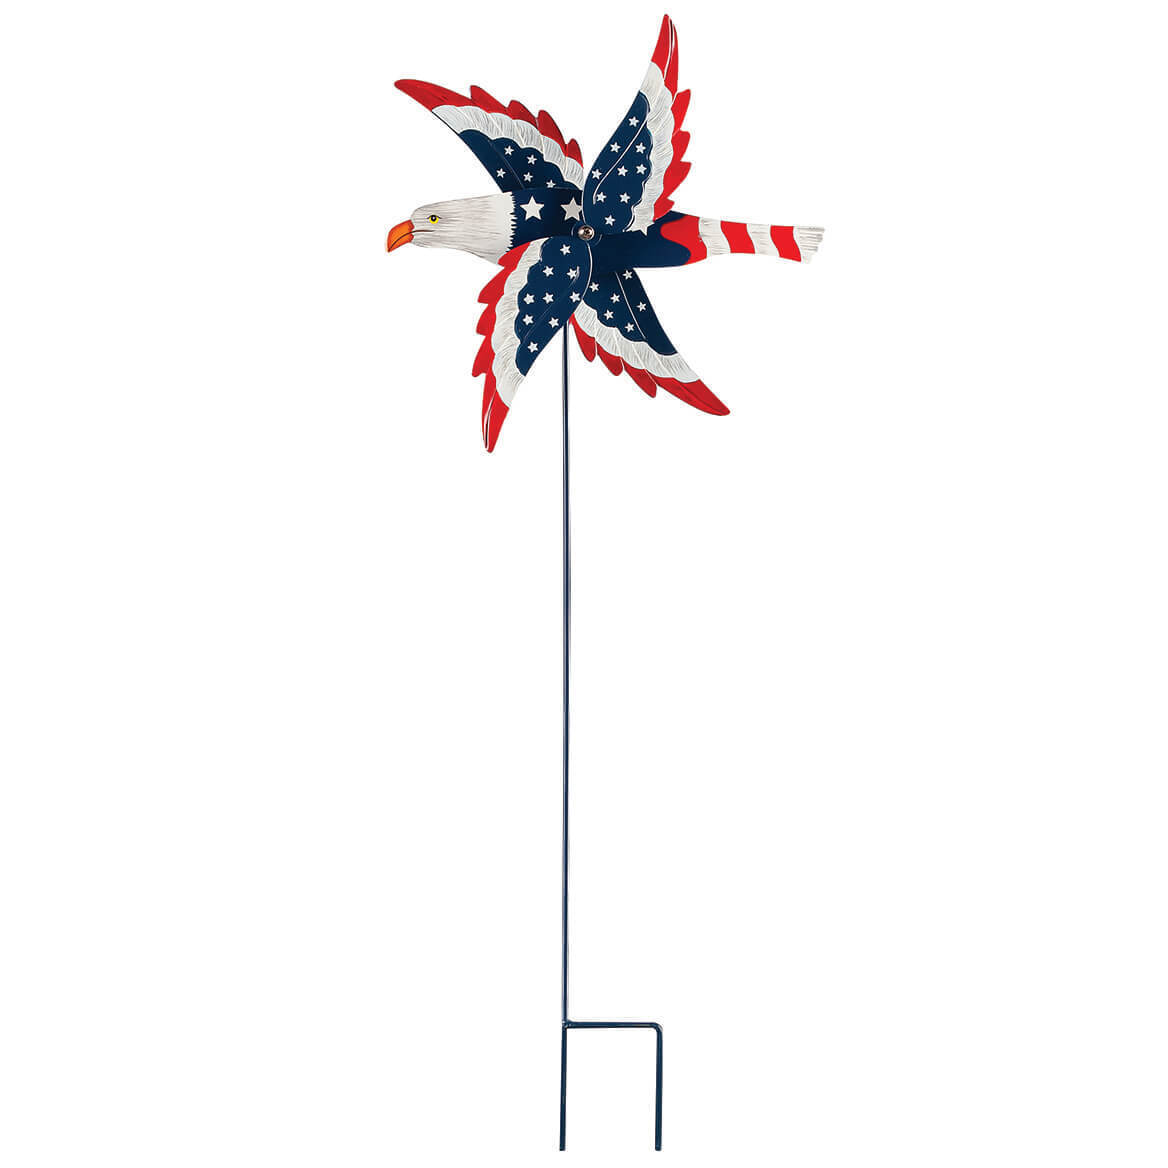 Patriotic Eagle Wind Spinner by Fox RiverTM Creations